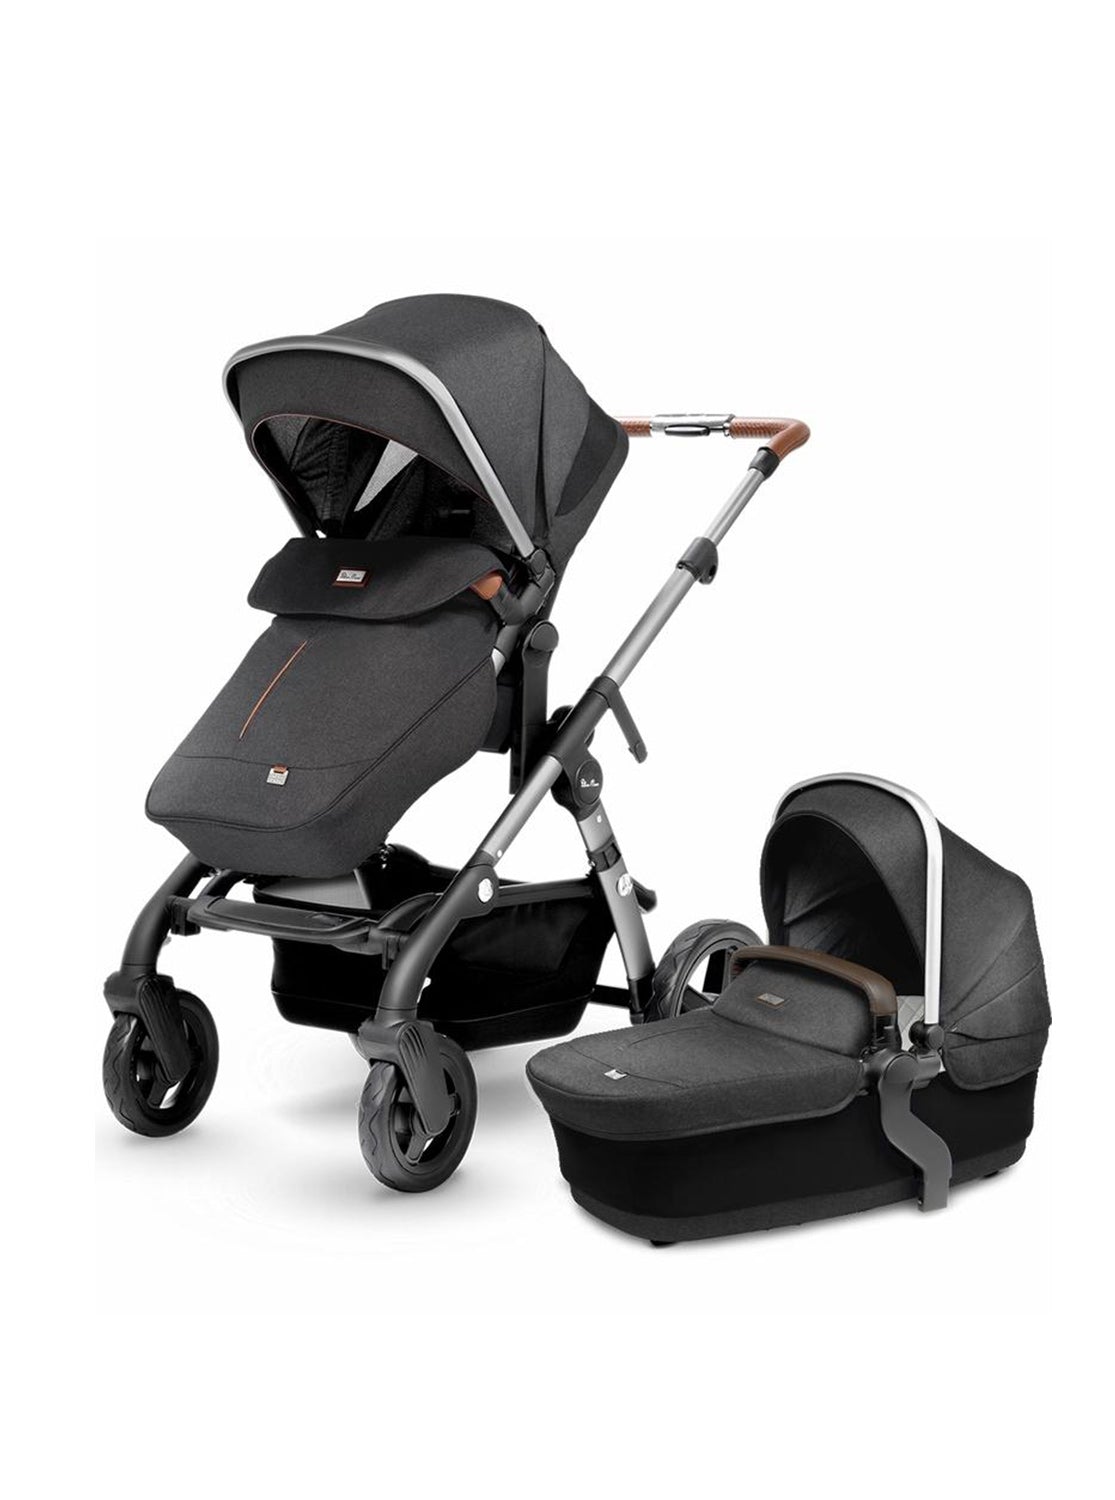 Silver Cross Wave Single Baby Stroller With Carry Cot 2018 - ANB Baby -$1000 - $2000